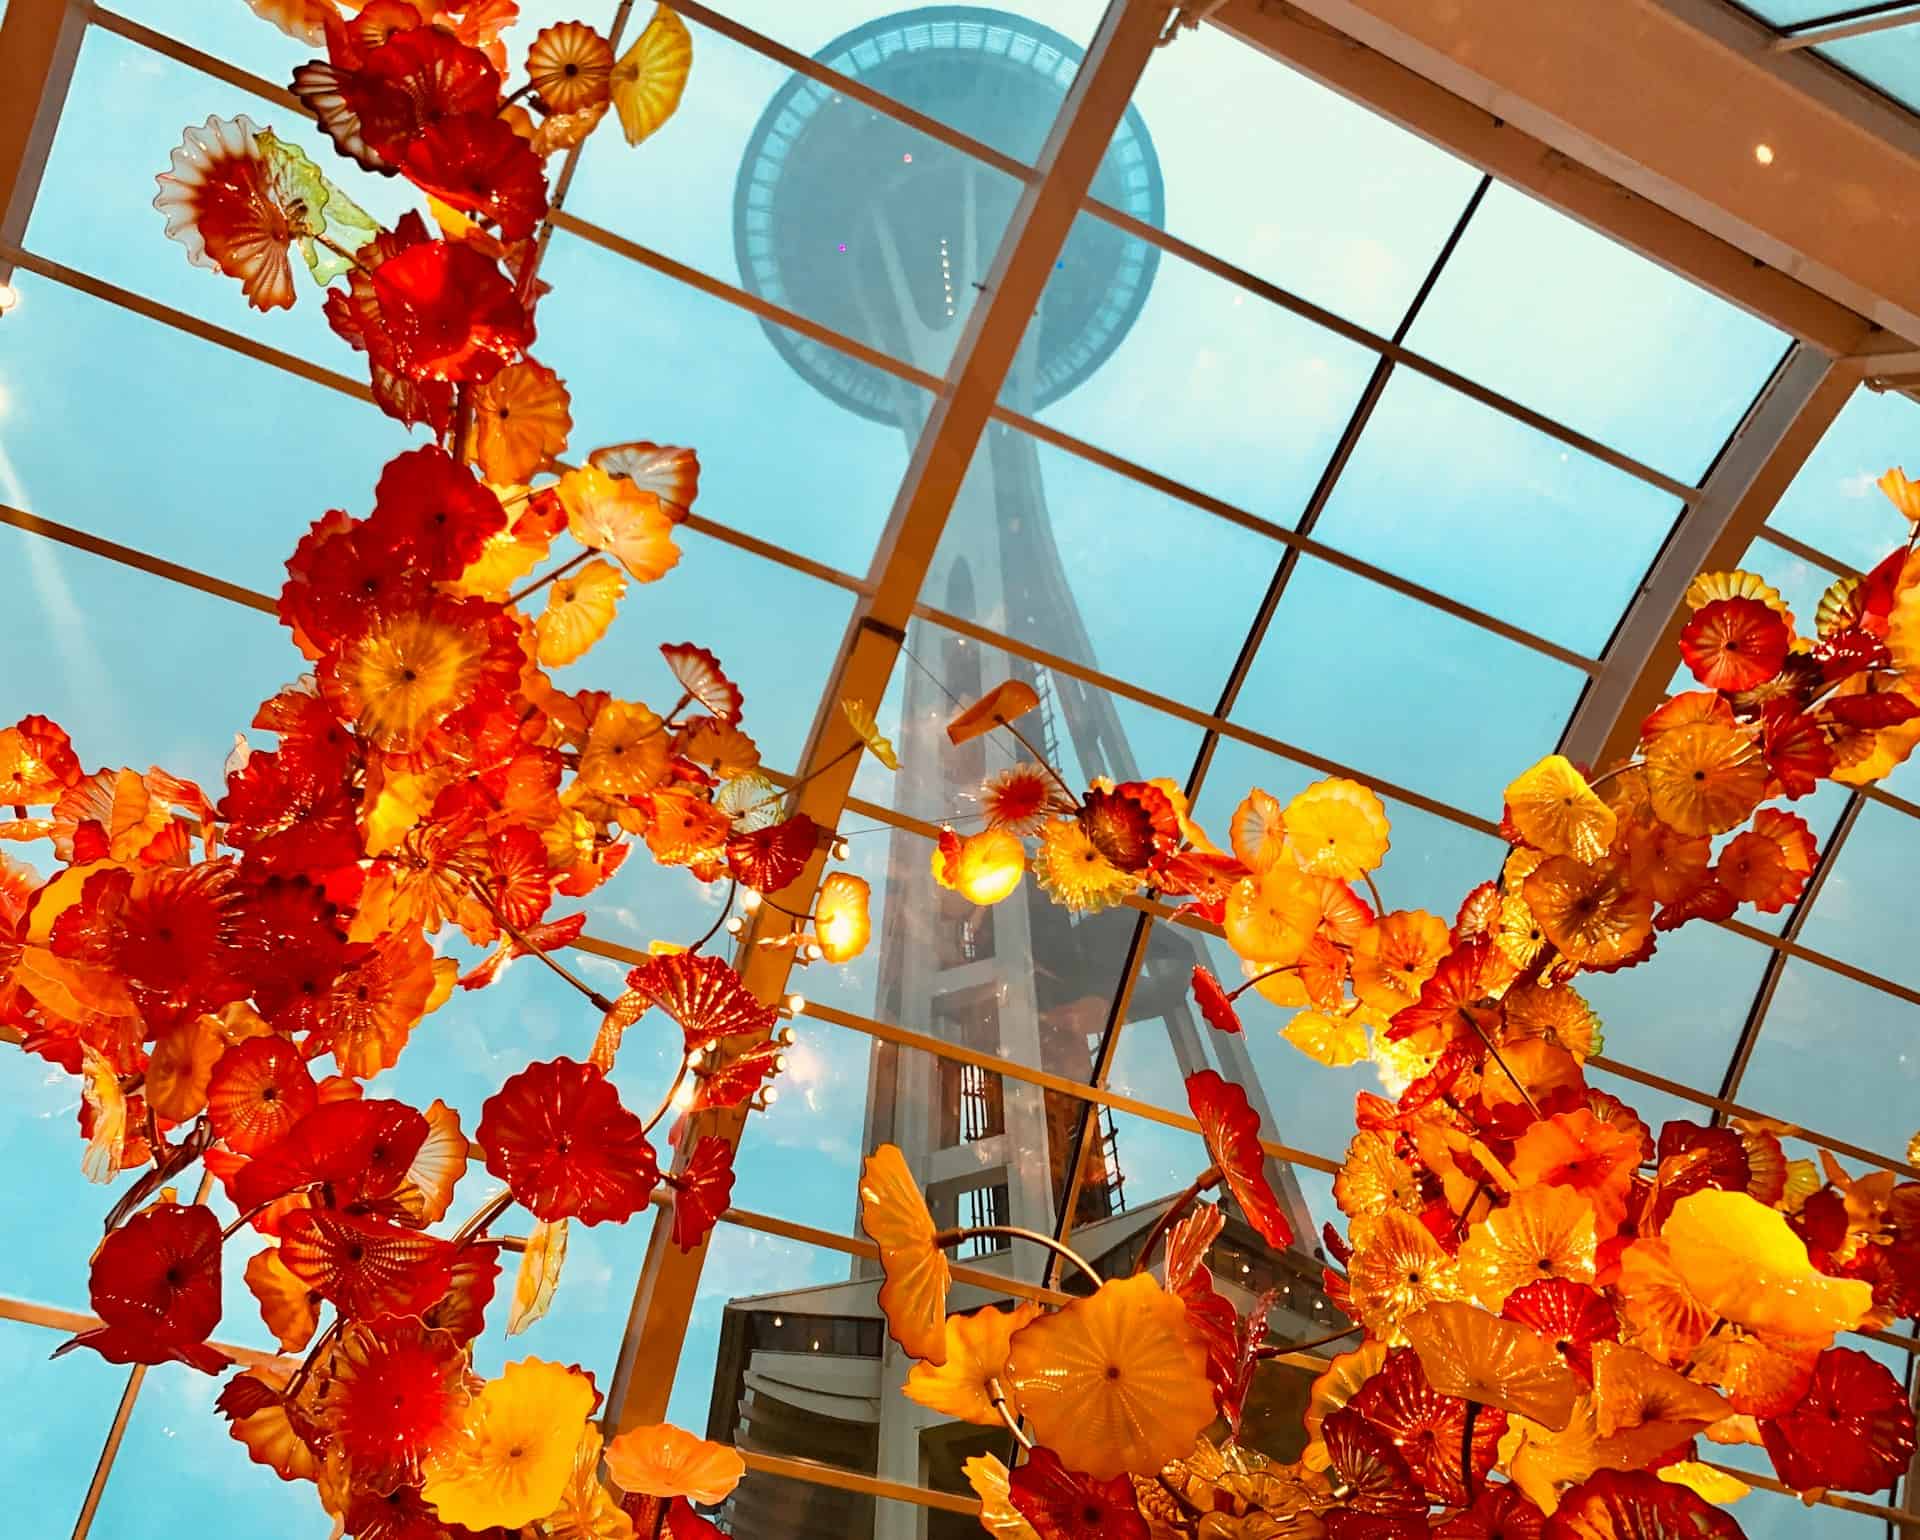 Best things to do in Seattle Washington - Christie Hudson - Space Needle view from Chihuly Garden and Glass by XH_S on Unsplash